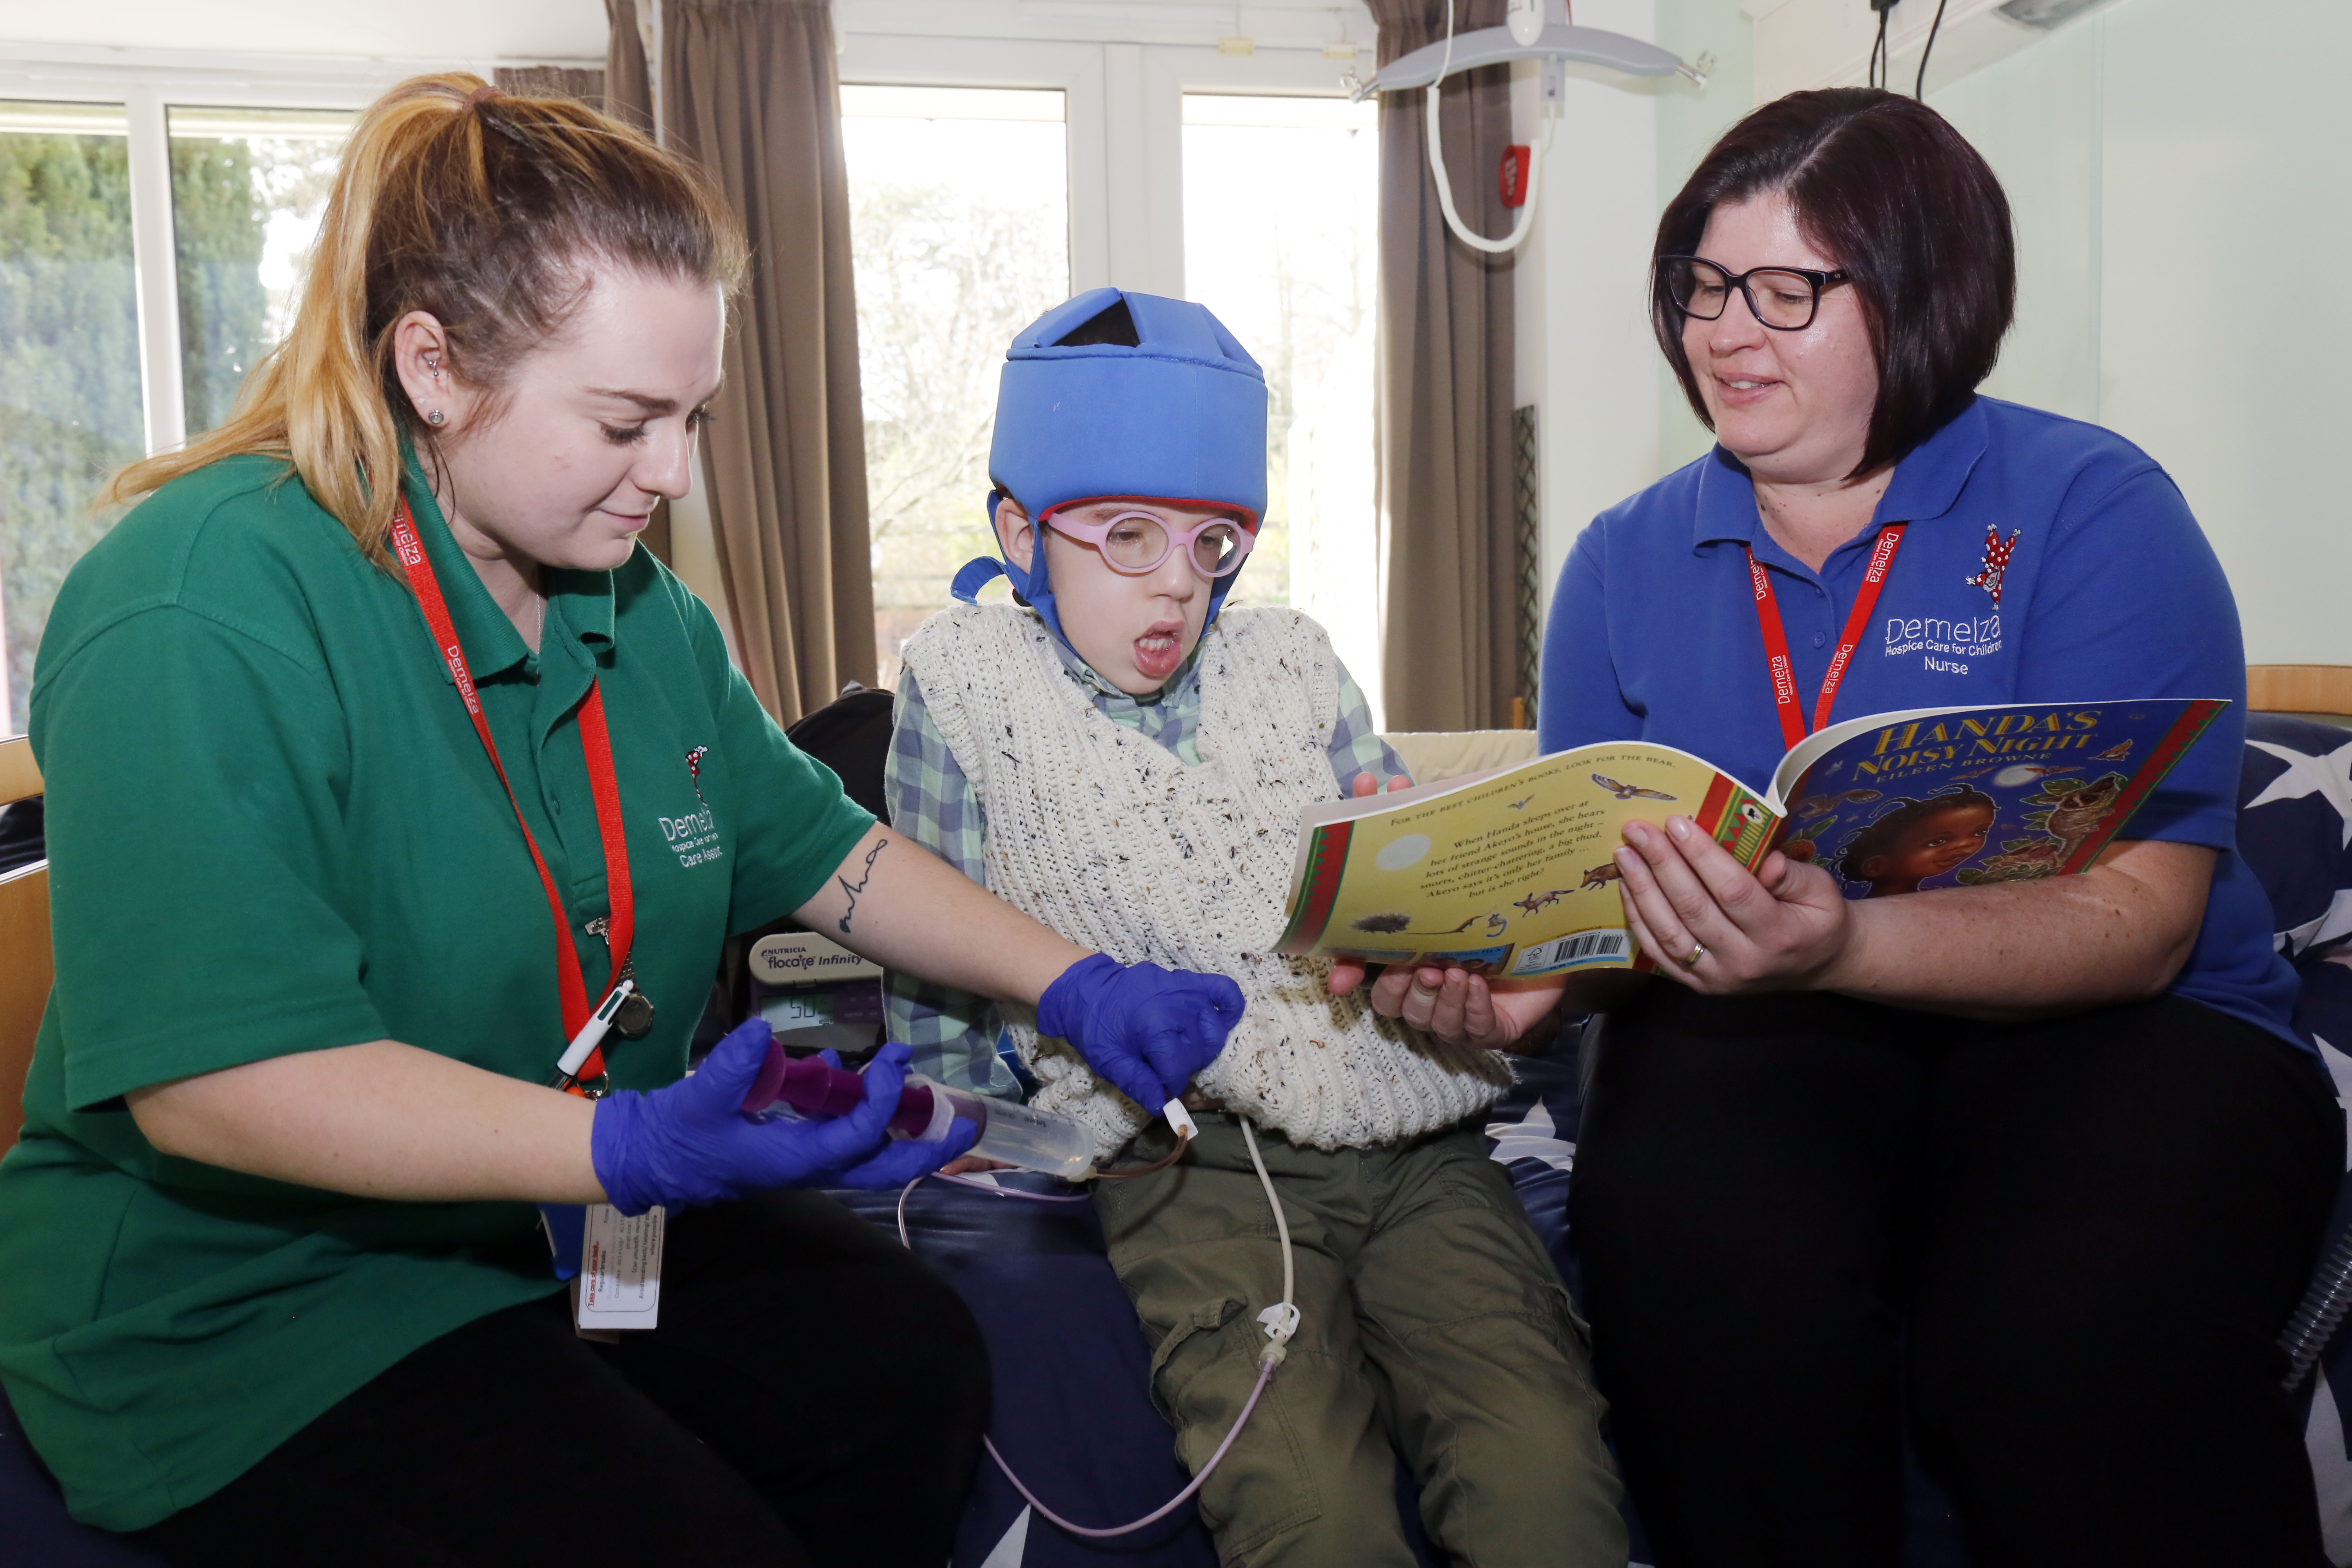 Jack sits on his bed, reading with a nurse, whilst another nurse is administering medication.